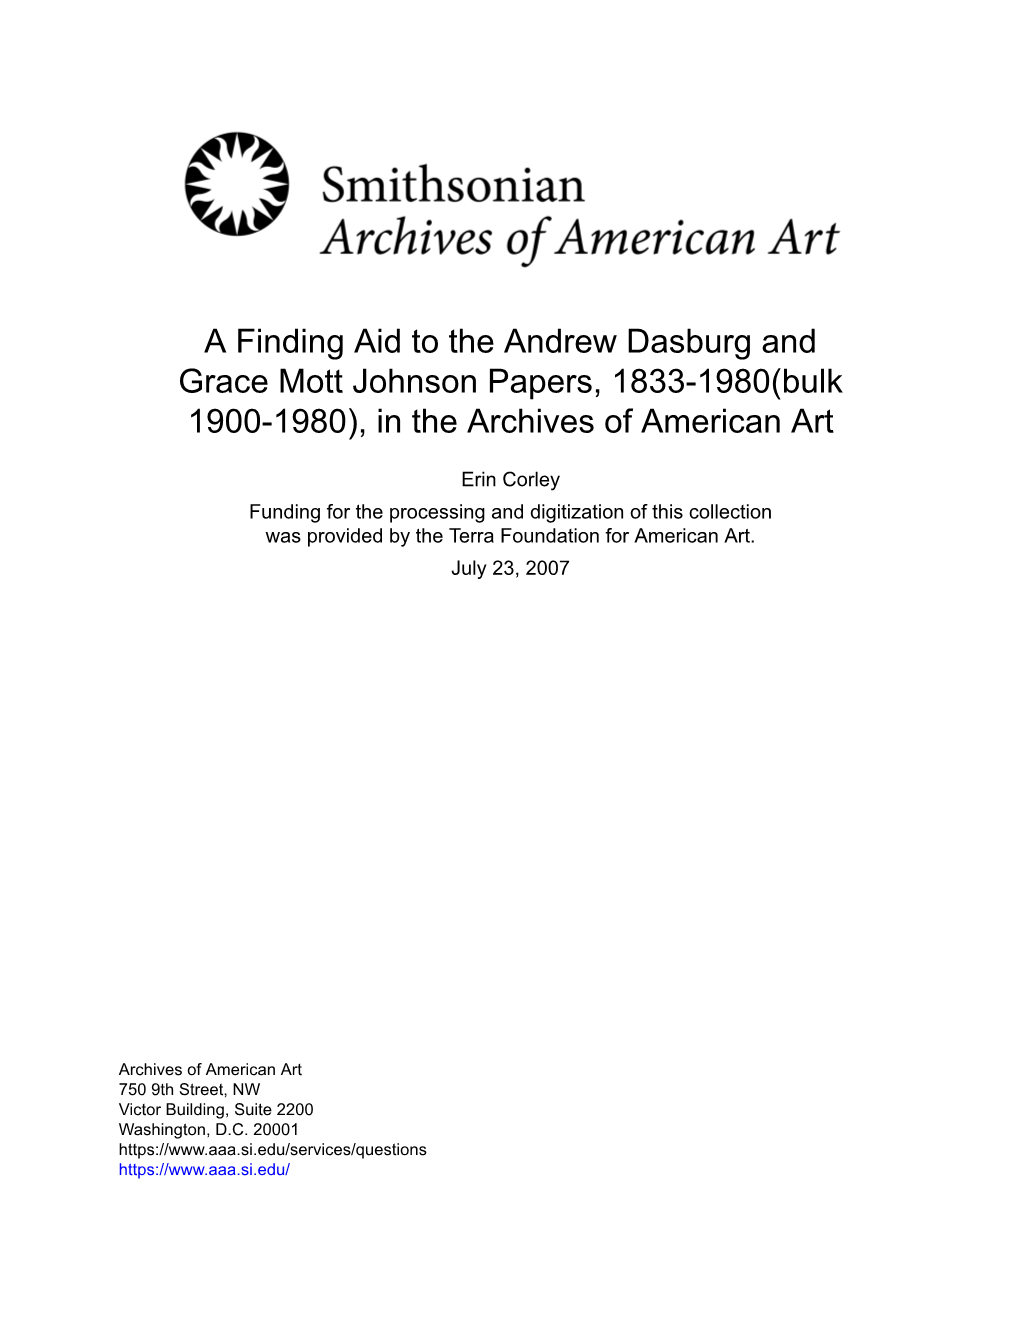 A Finding Aid to the Andrew Dasburg and Grace Mott Johnson Papers, 1833-1980(Bulk 1900-1980), in the Archives of American Art